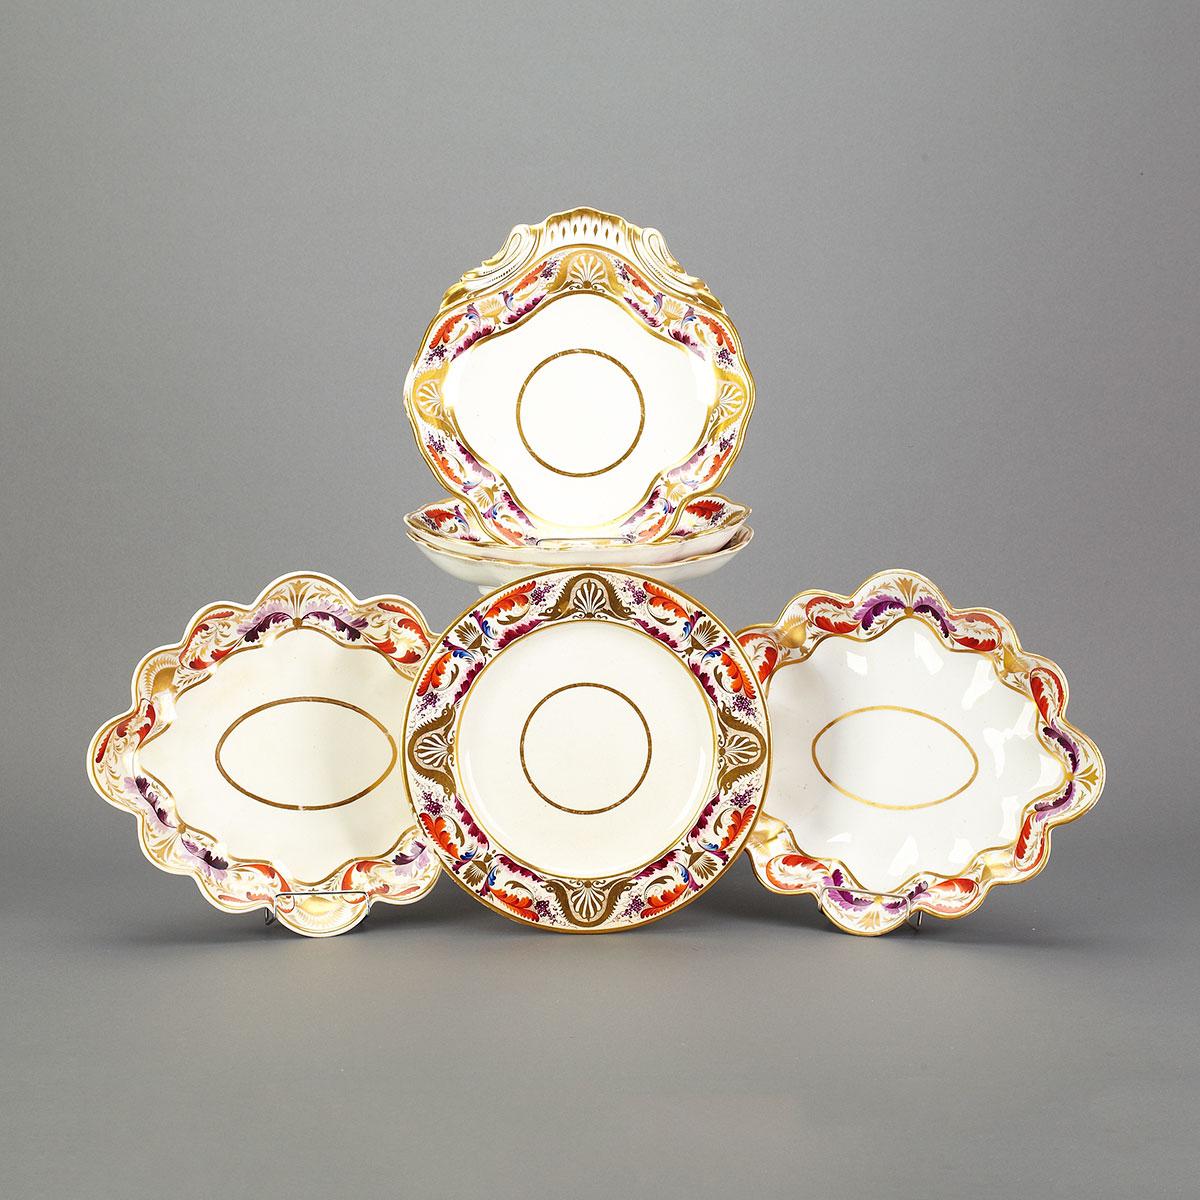 Pair of Derby Lobed Oval Dishes, Three Shell Dishes and a Plate, early 19th century